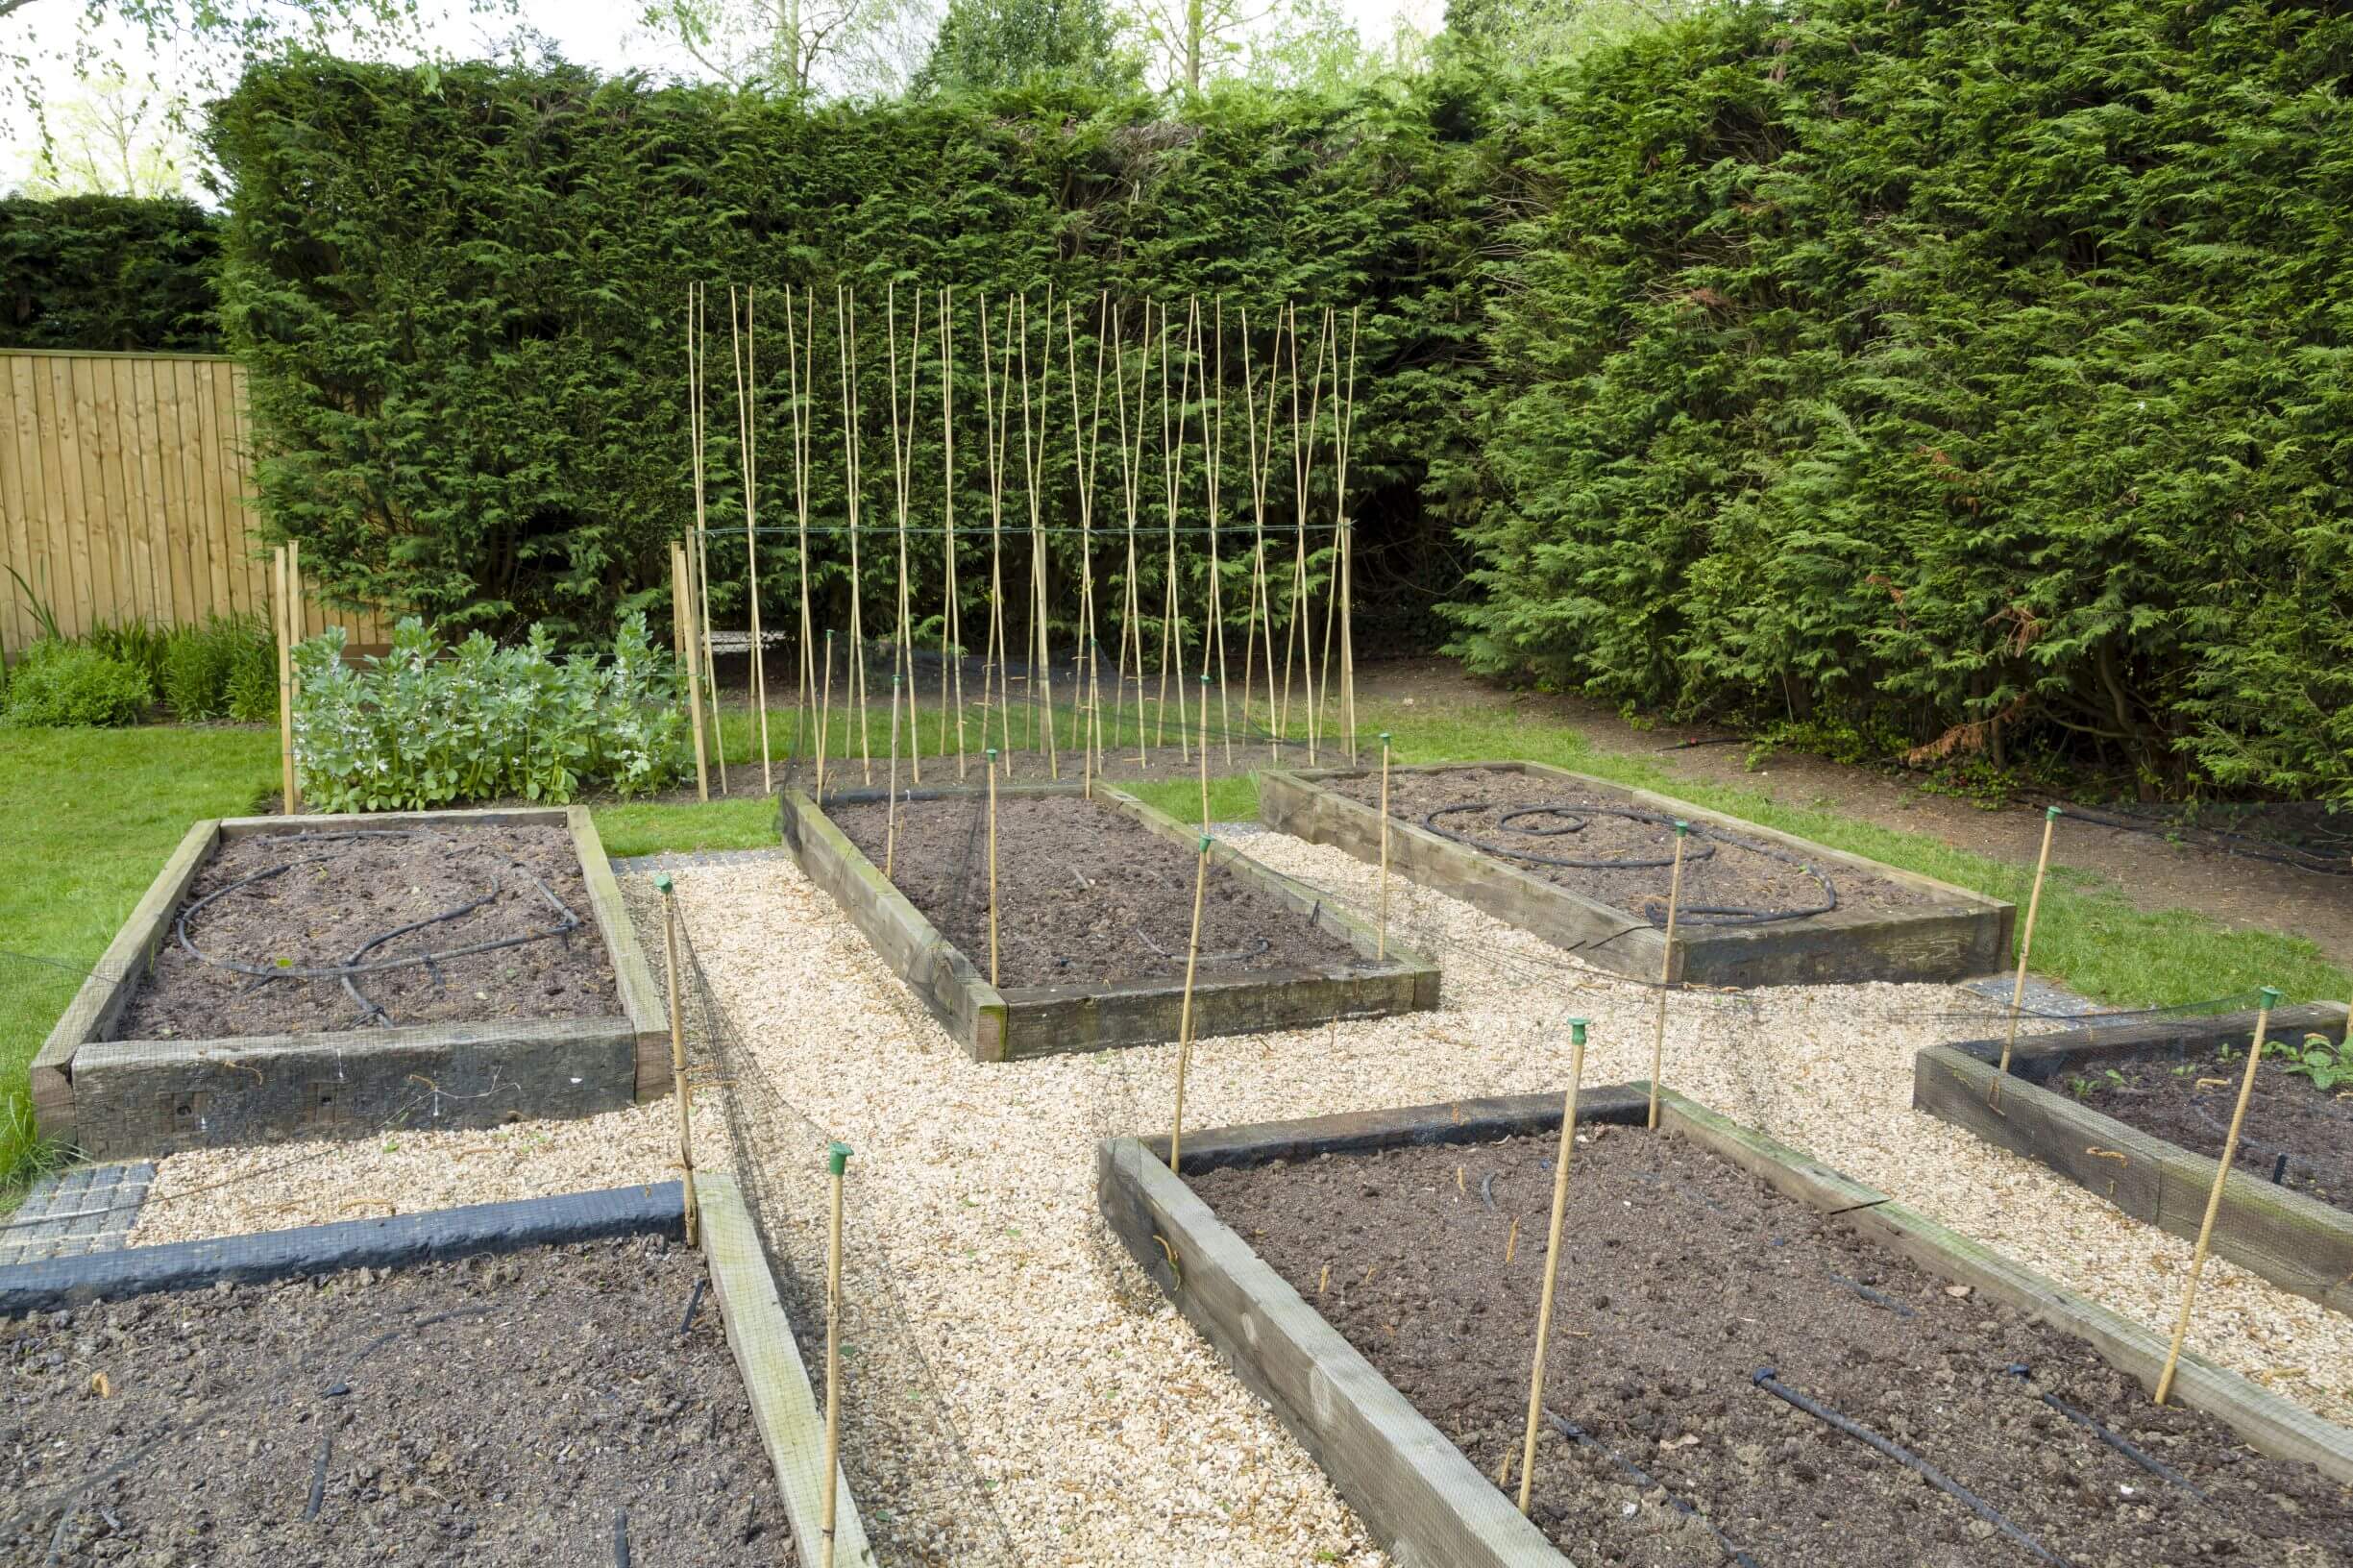 Planning A Vegetable Garden, Are Treated Pine Sleepers Ok For Vegetable Gardens